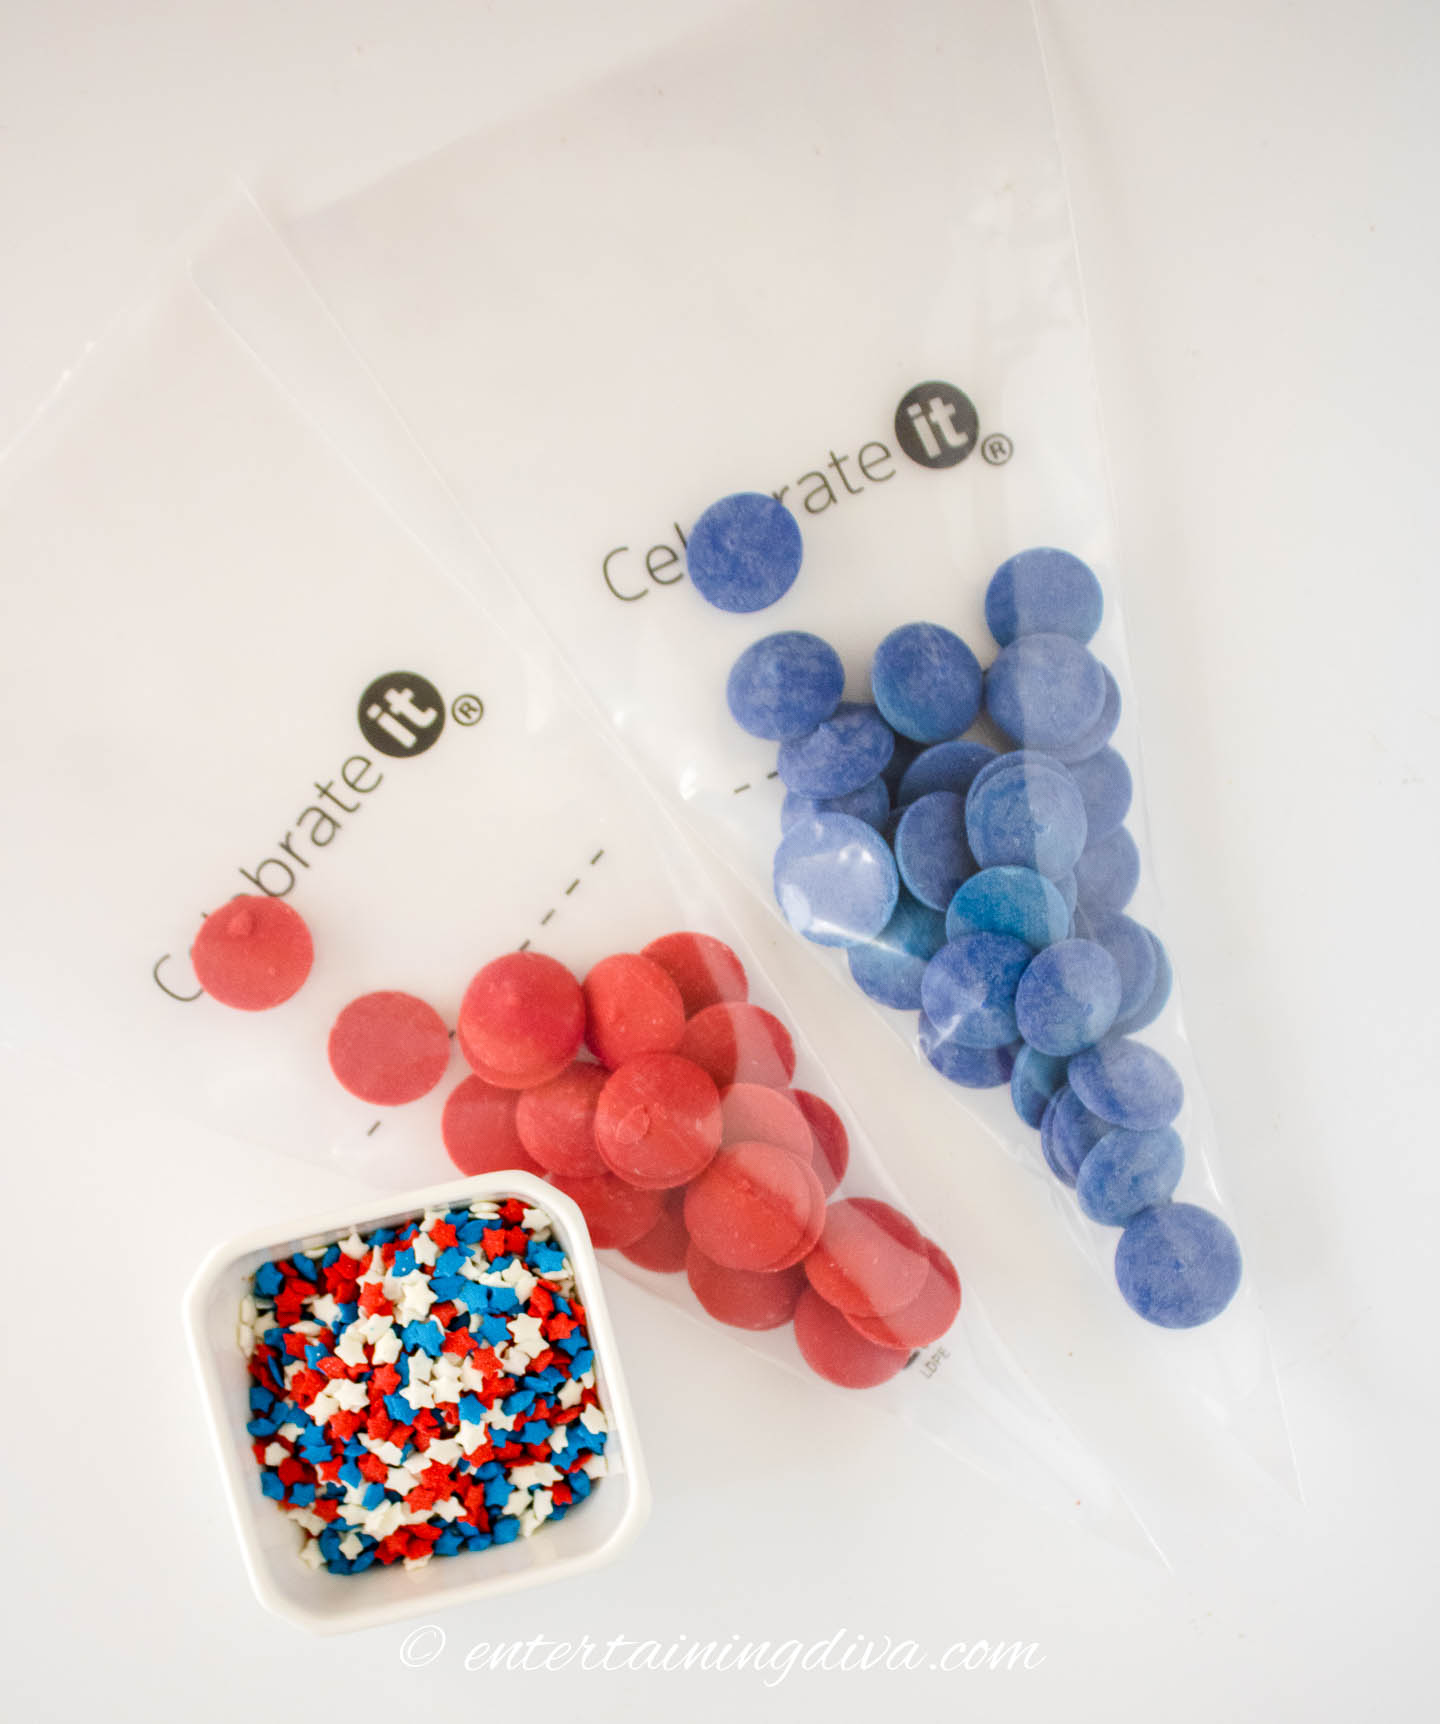 Red and blue candy melts in piping bags beside a bowl of star sprinkles